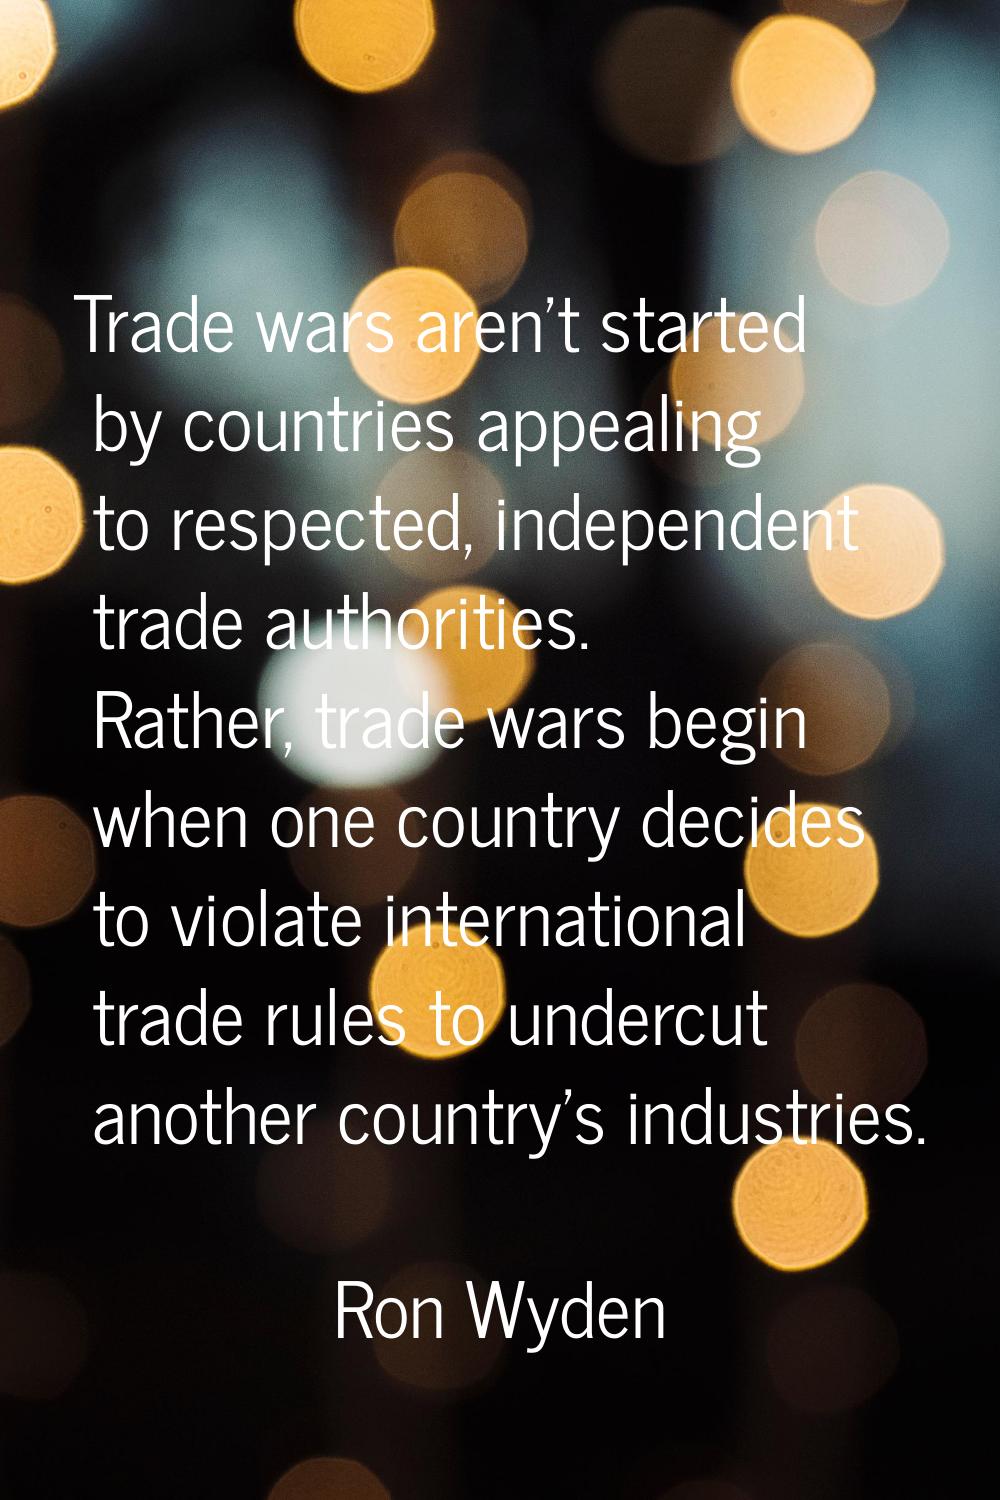 Trade wars aren't started by countries appealing to respected, independent trade authorities. Rathe